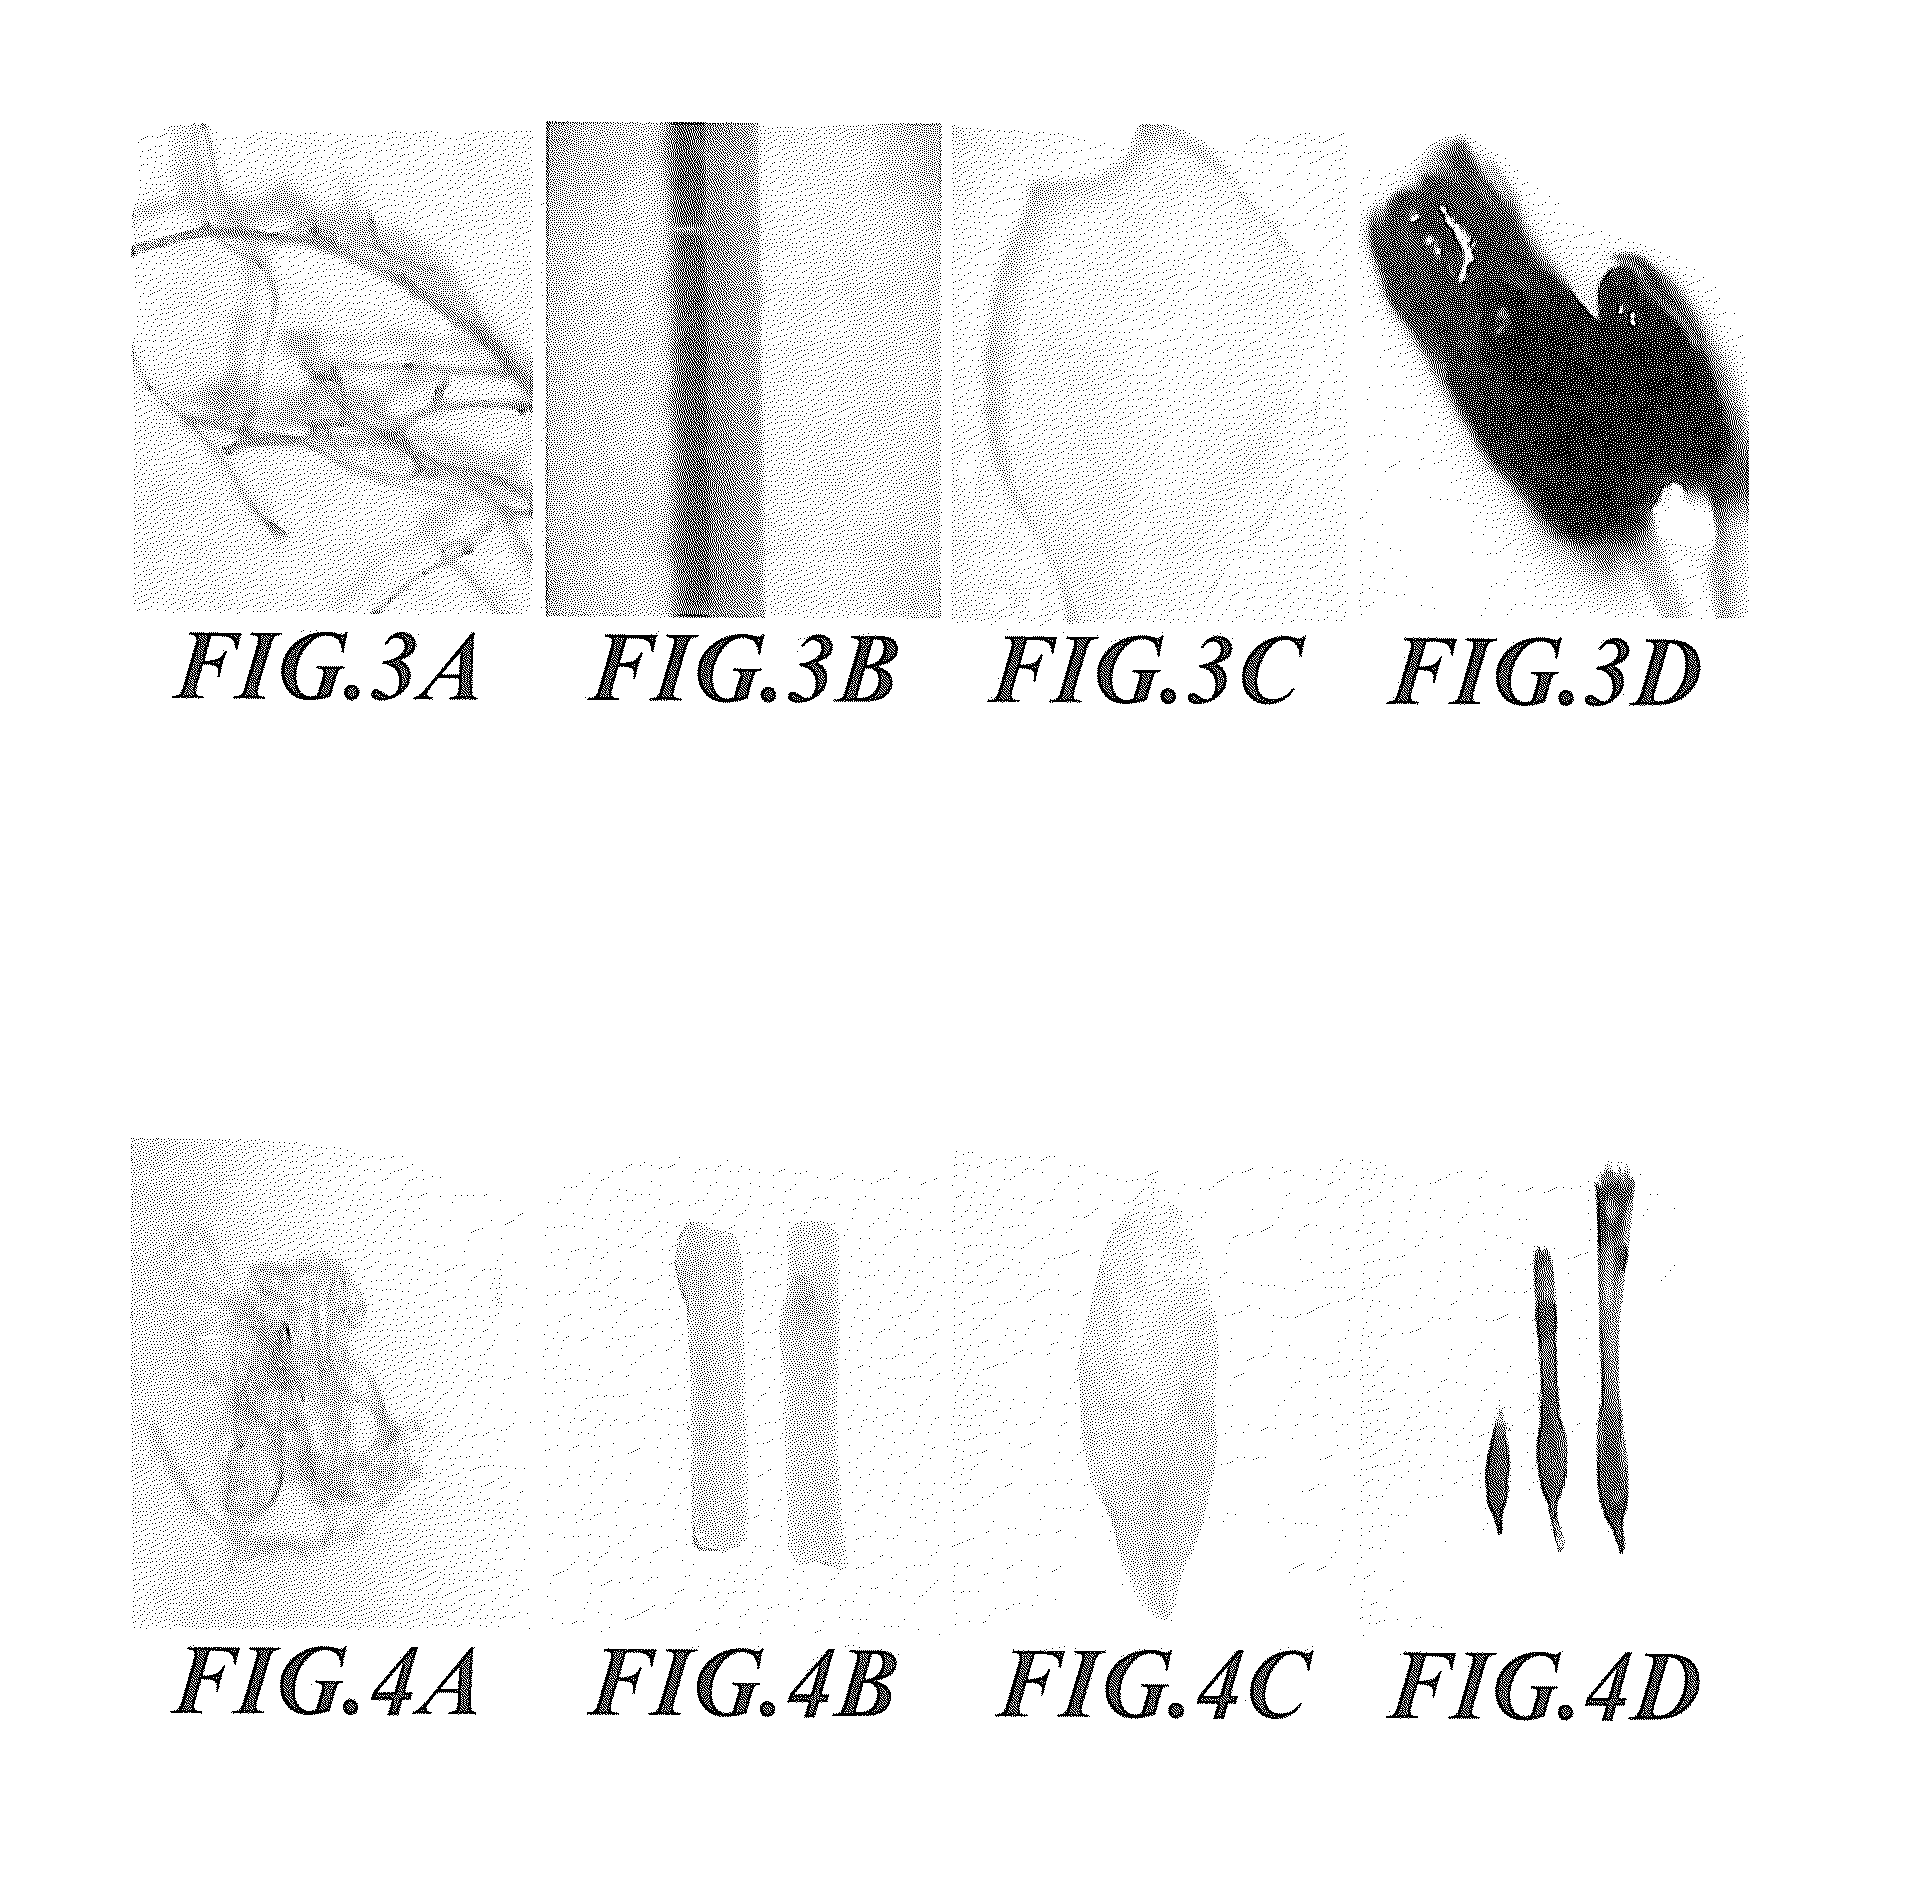 Flower tissue-specific promoter and uses thereof